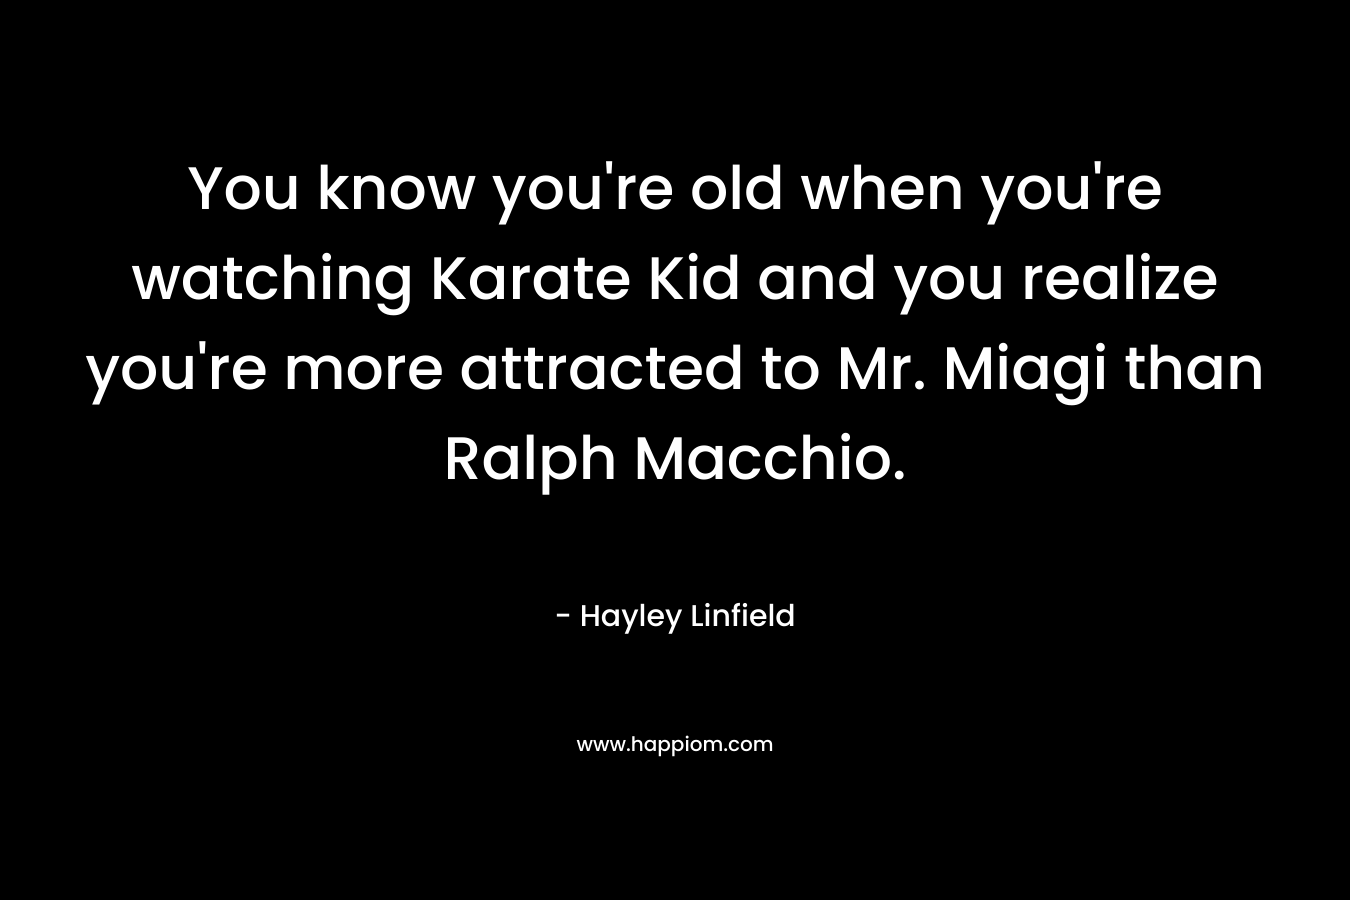 You know you’re old when you’re watching Karate Kid and you realize you’re more attracted to Mr. Miagi than Ralph Macchio. – Hayley Linfield